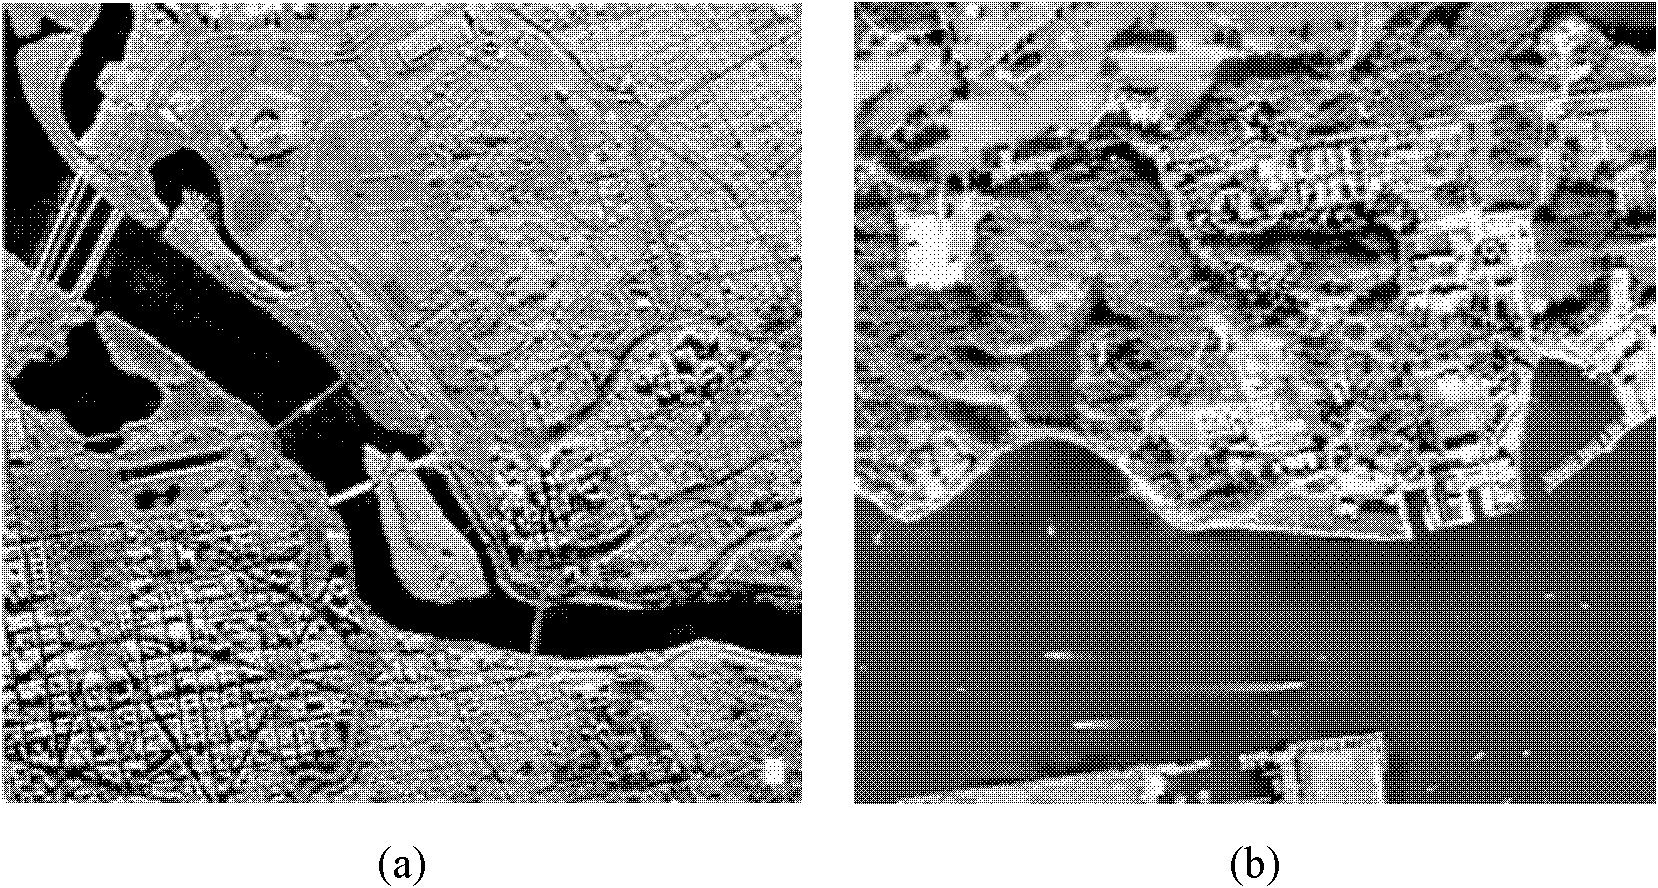 Compressed learning perception based SAR (Synthetic Aperture Radar) high-resolution image reconstruction method